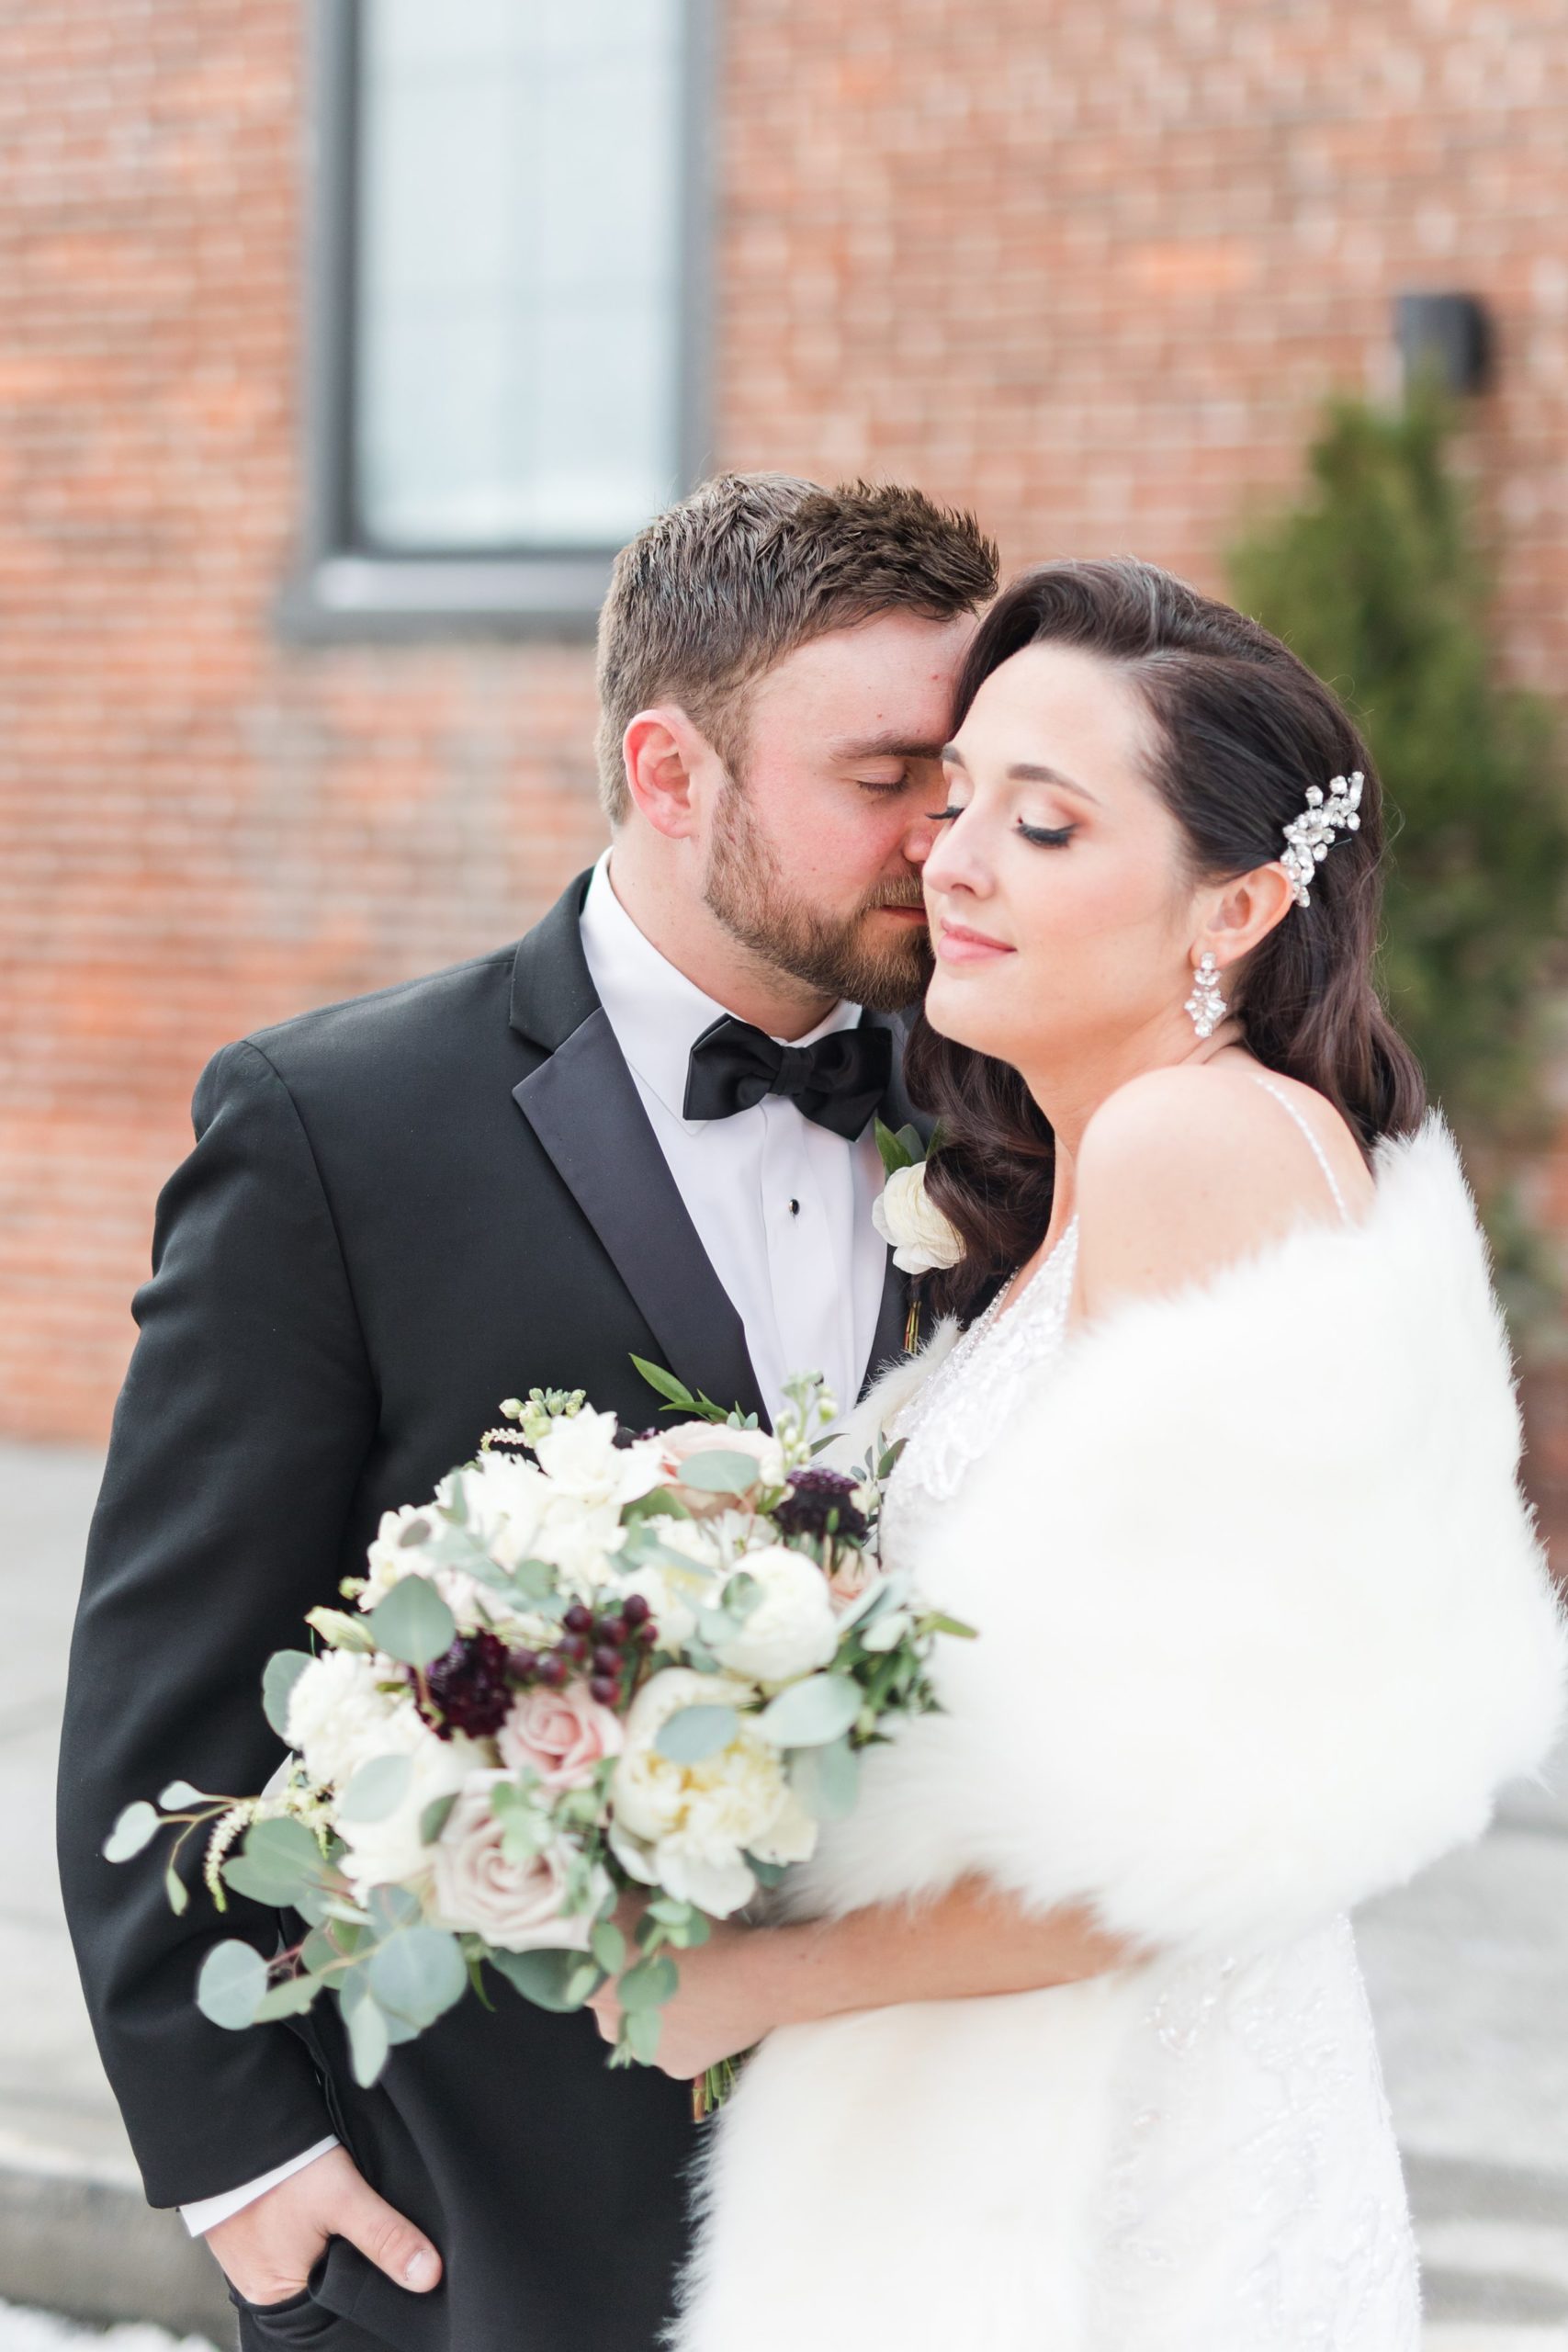 Chic Winter Wedding at The Booking House